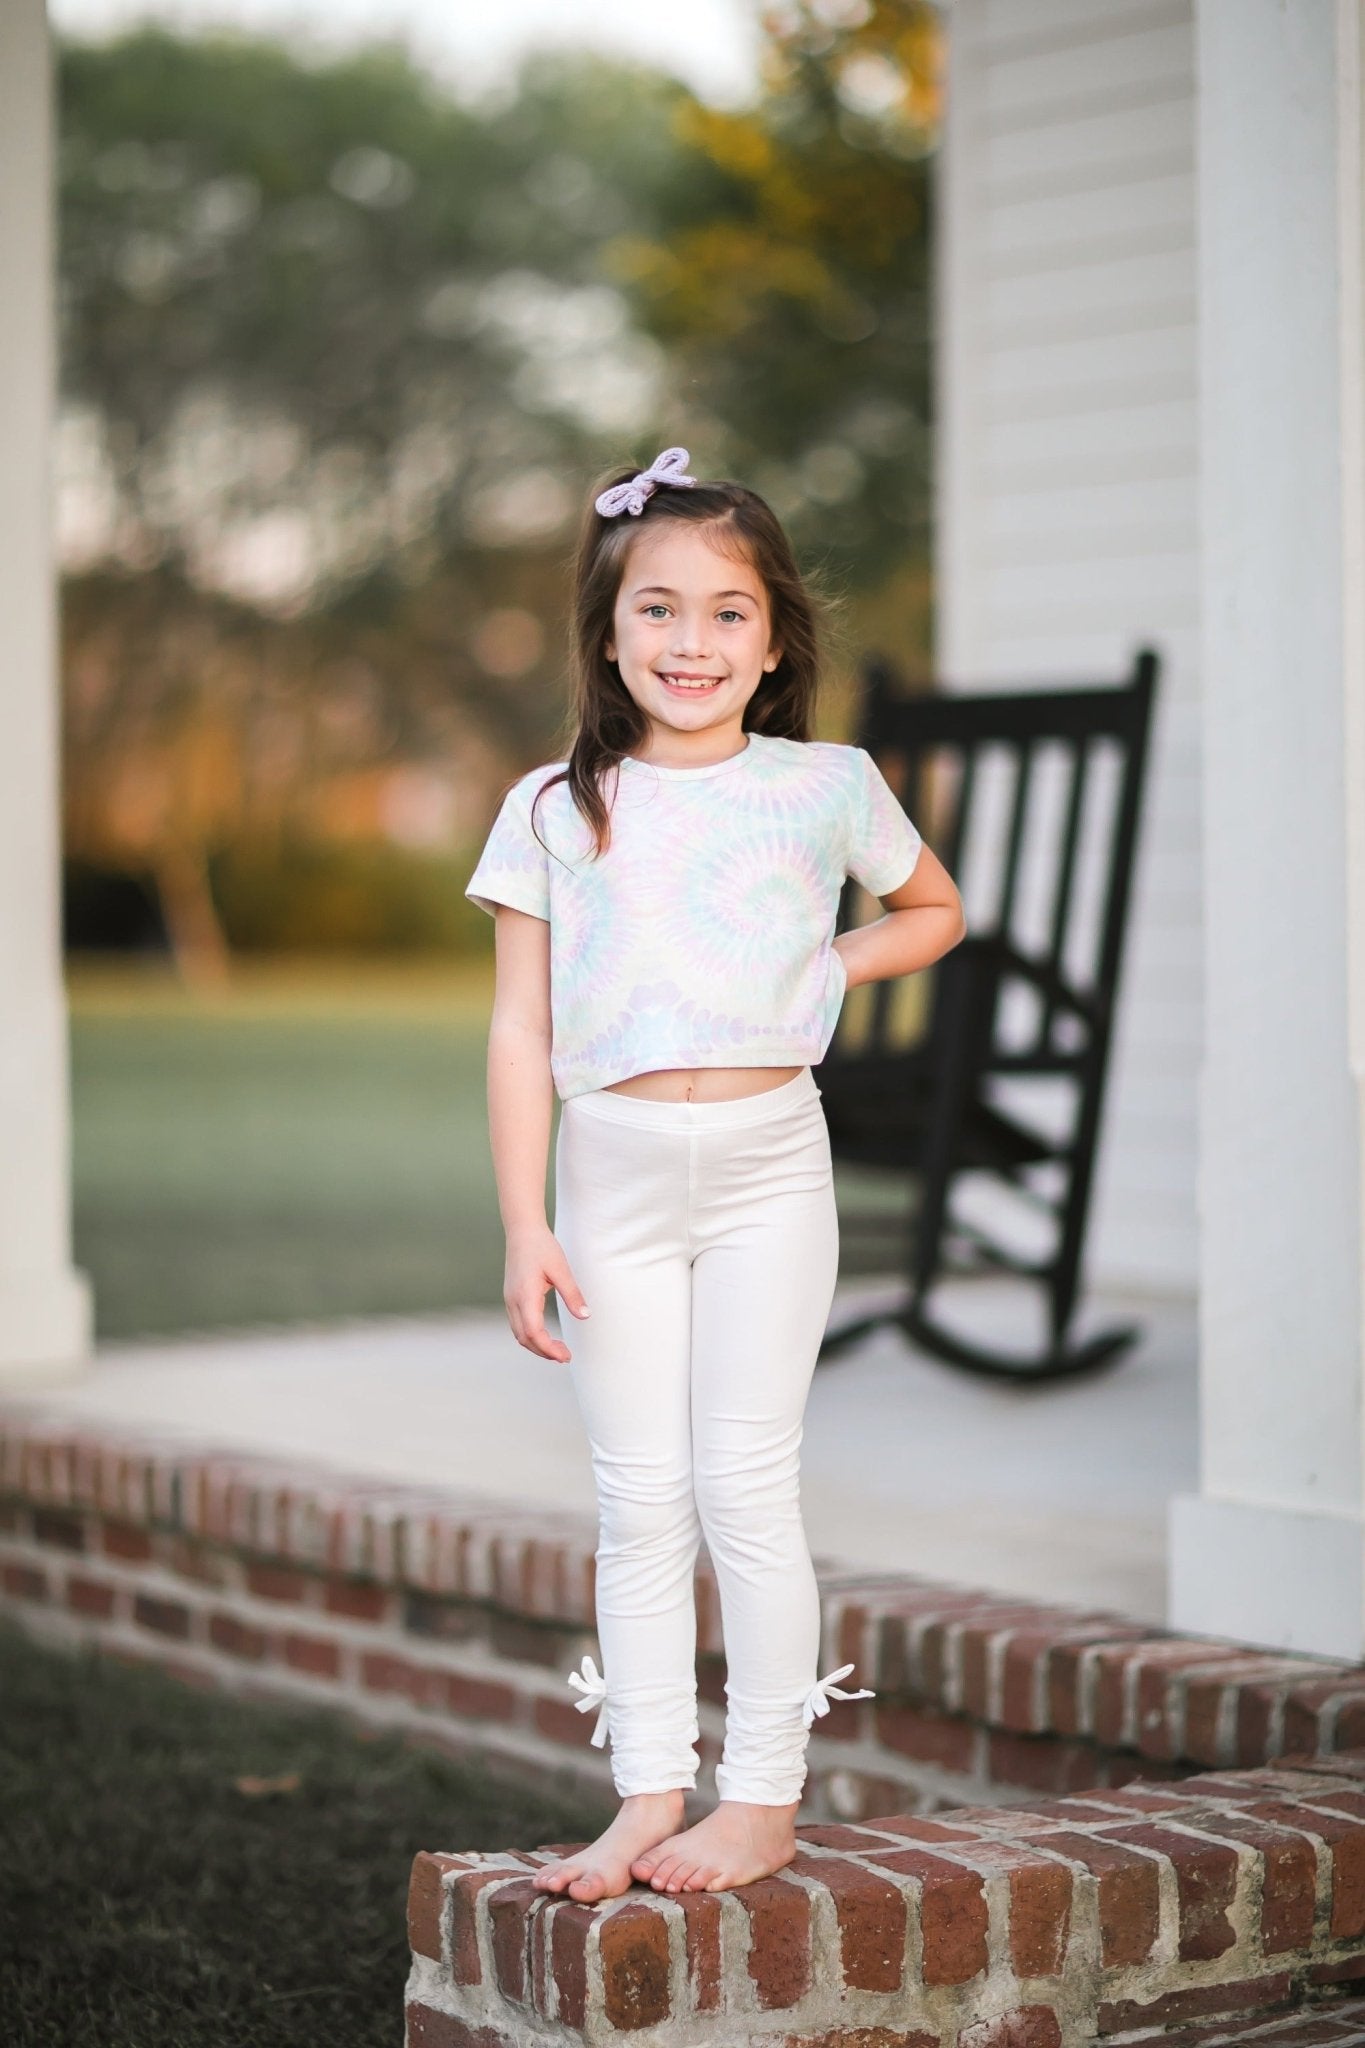 Never Basic Evie's Backyard White Ruched Ankle Bow Accent Leggings - Evie's Closet Clothing